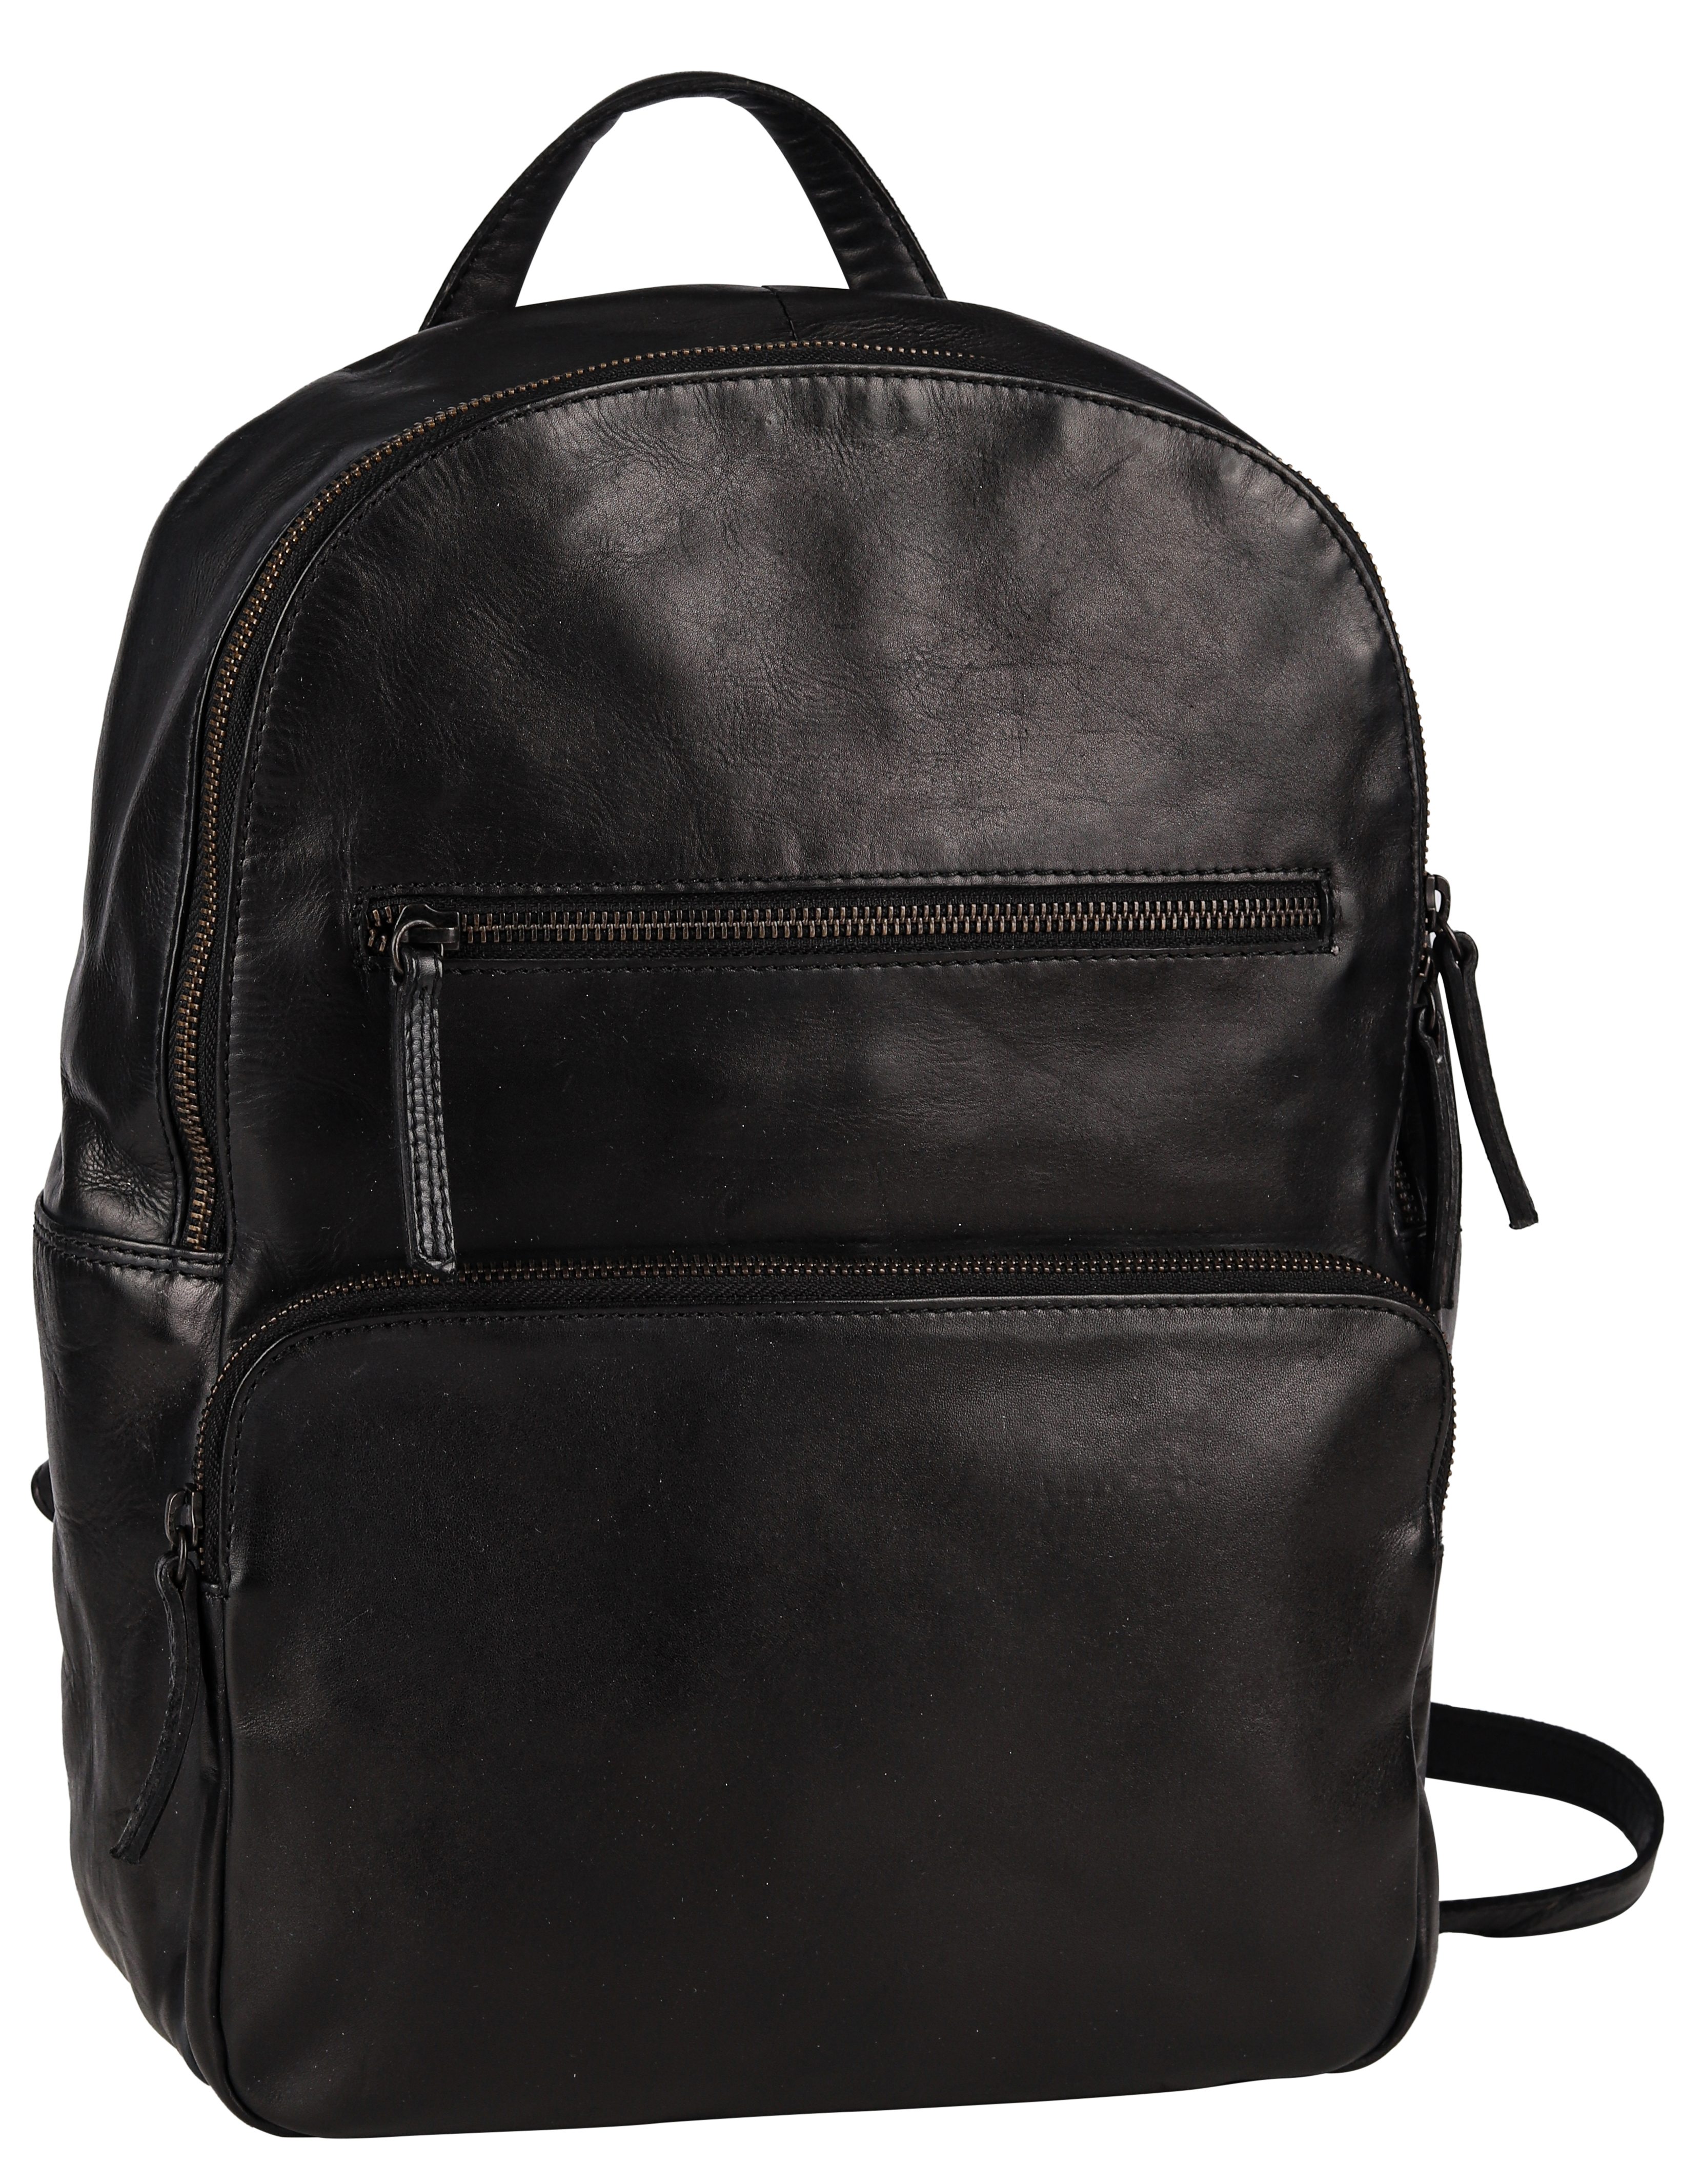 BOL/Open Road Two Strap Adjustable Leather Backpack